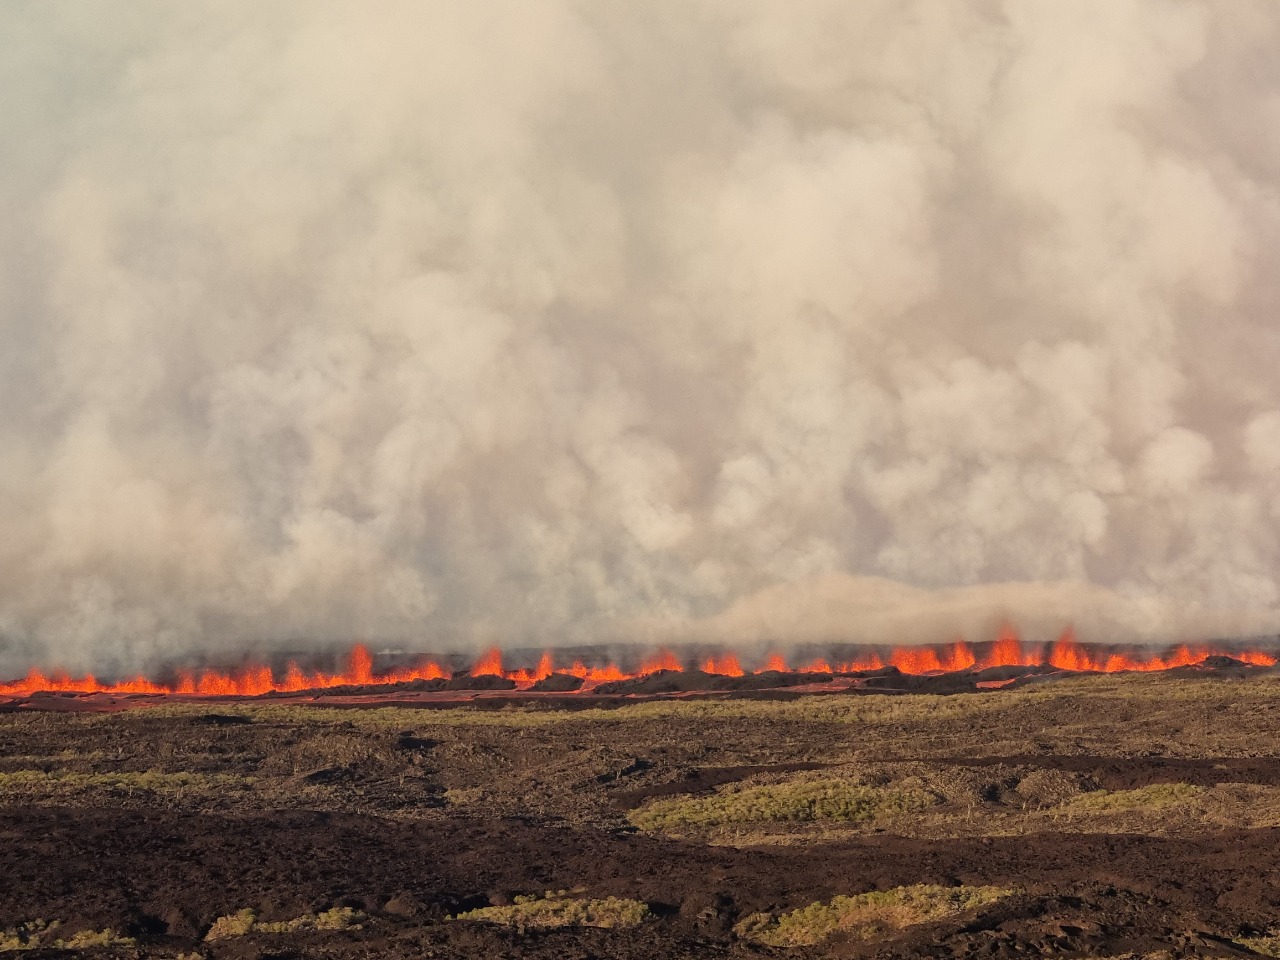 Lava fountains erupt from fissure chain of vents (image: Parque Galápagos)